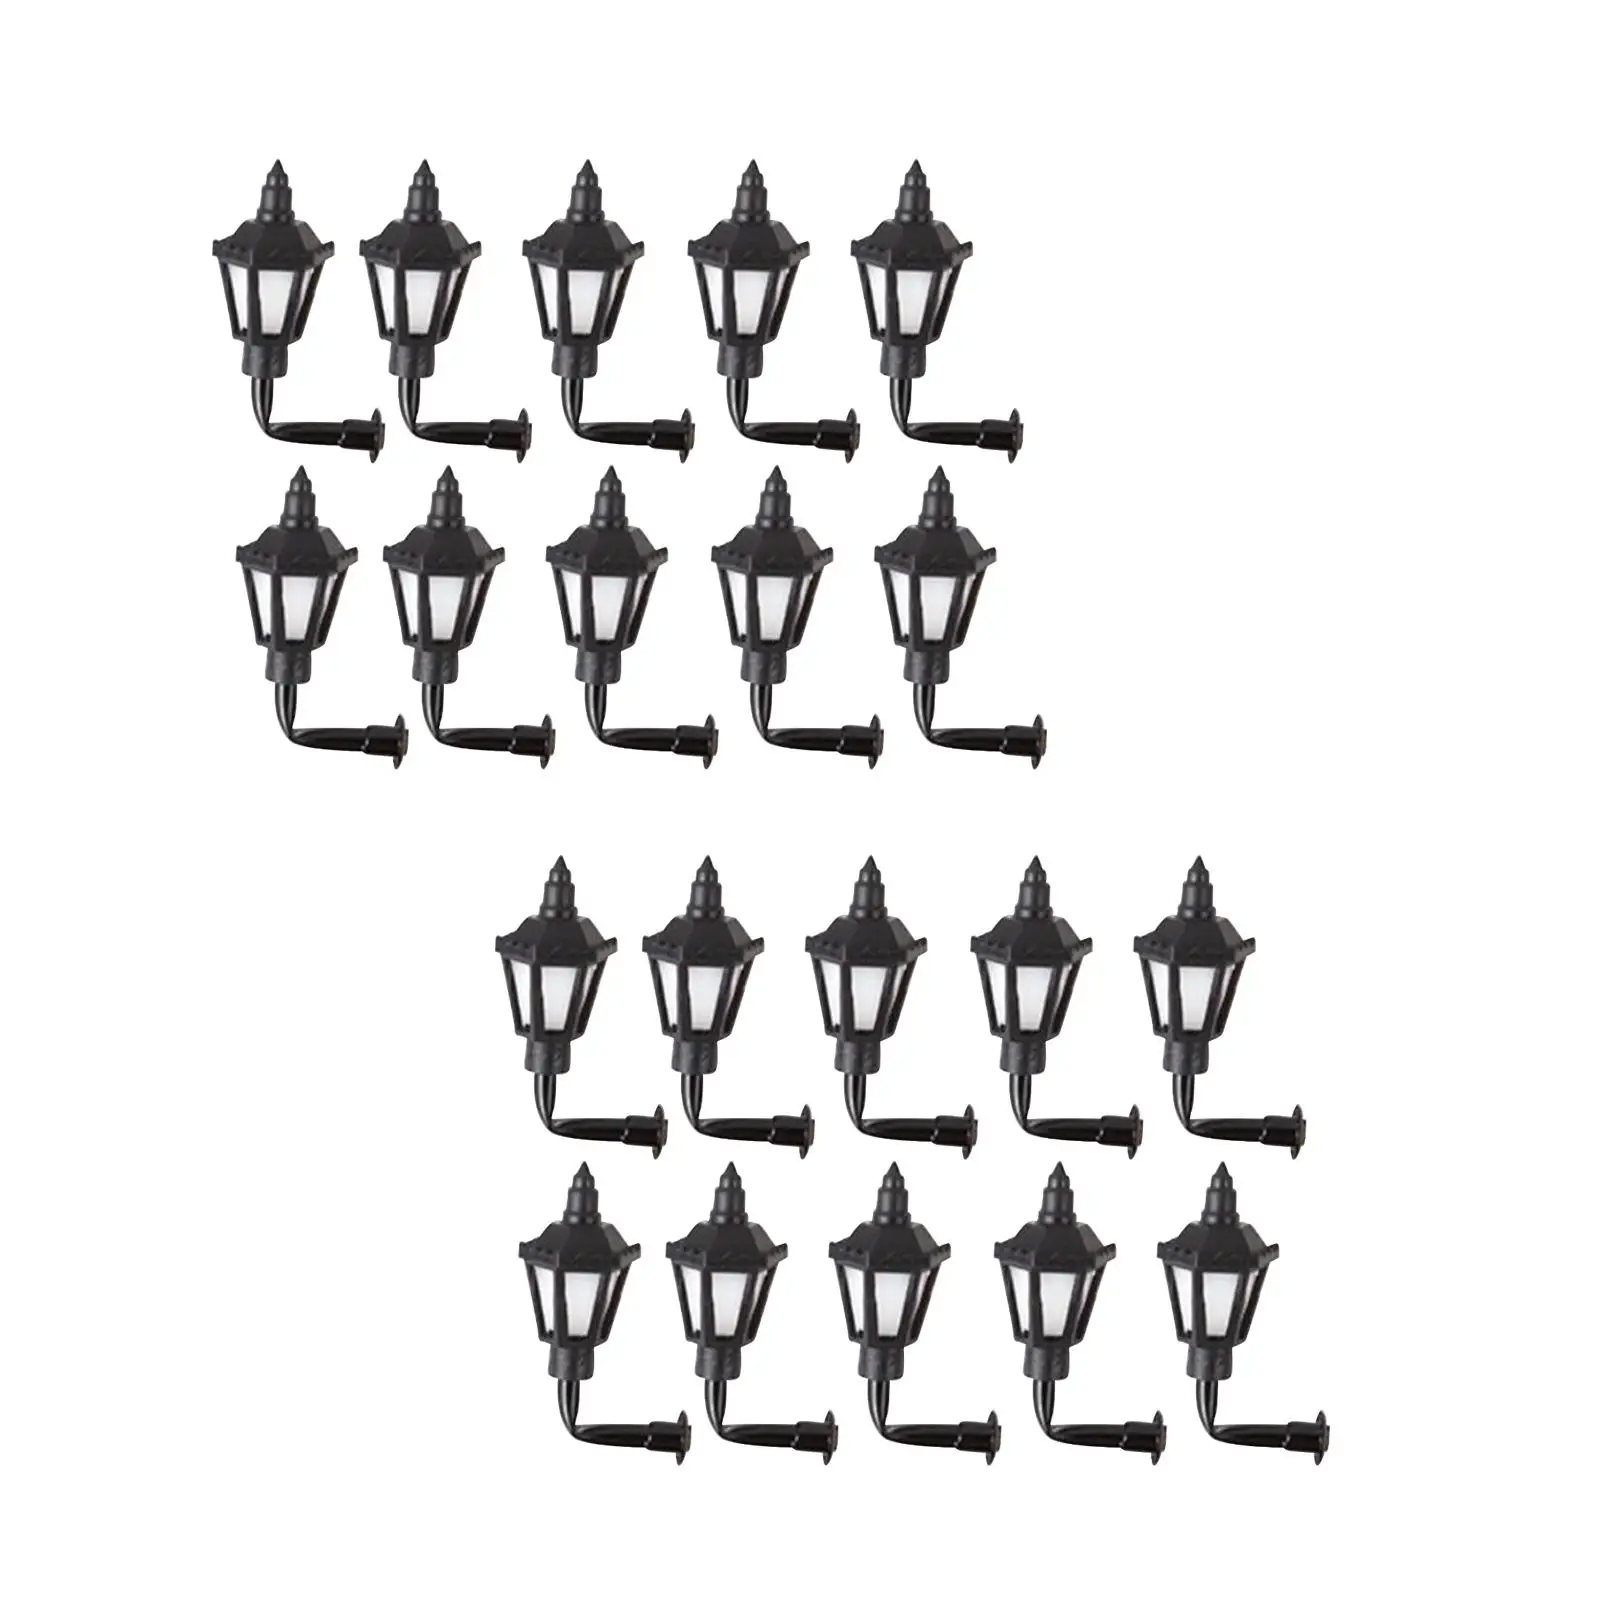 10x Mini Miniature Street Light Model for Dollhouse Decoration Toy Accessory 1/87 Building Sand Table Streets Lamps Hanging Lamp